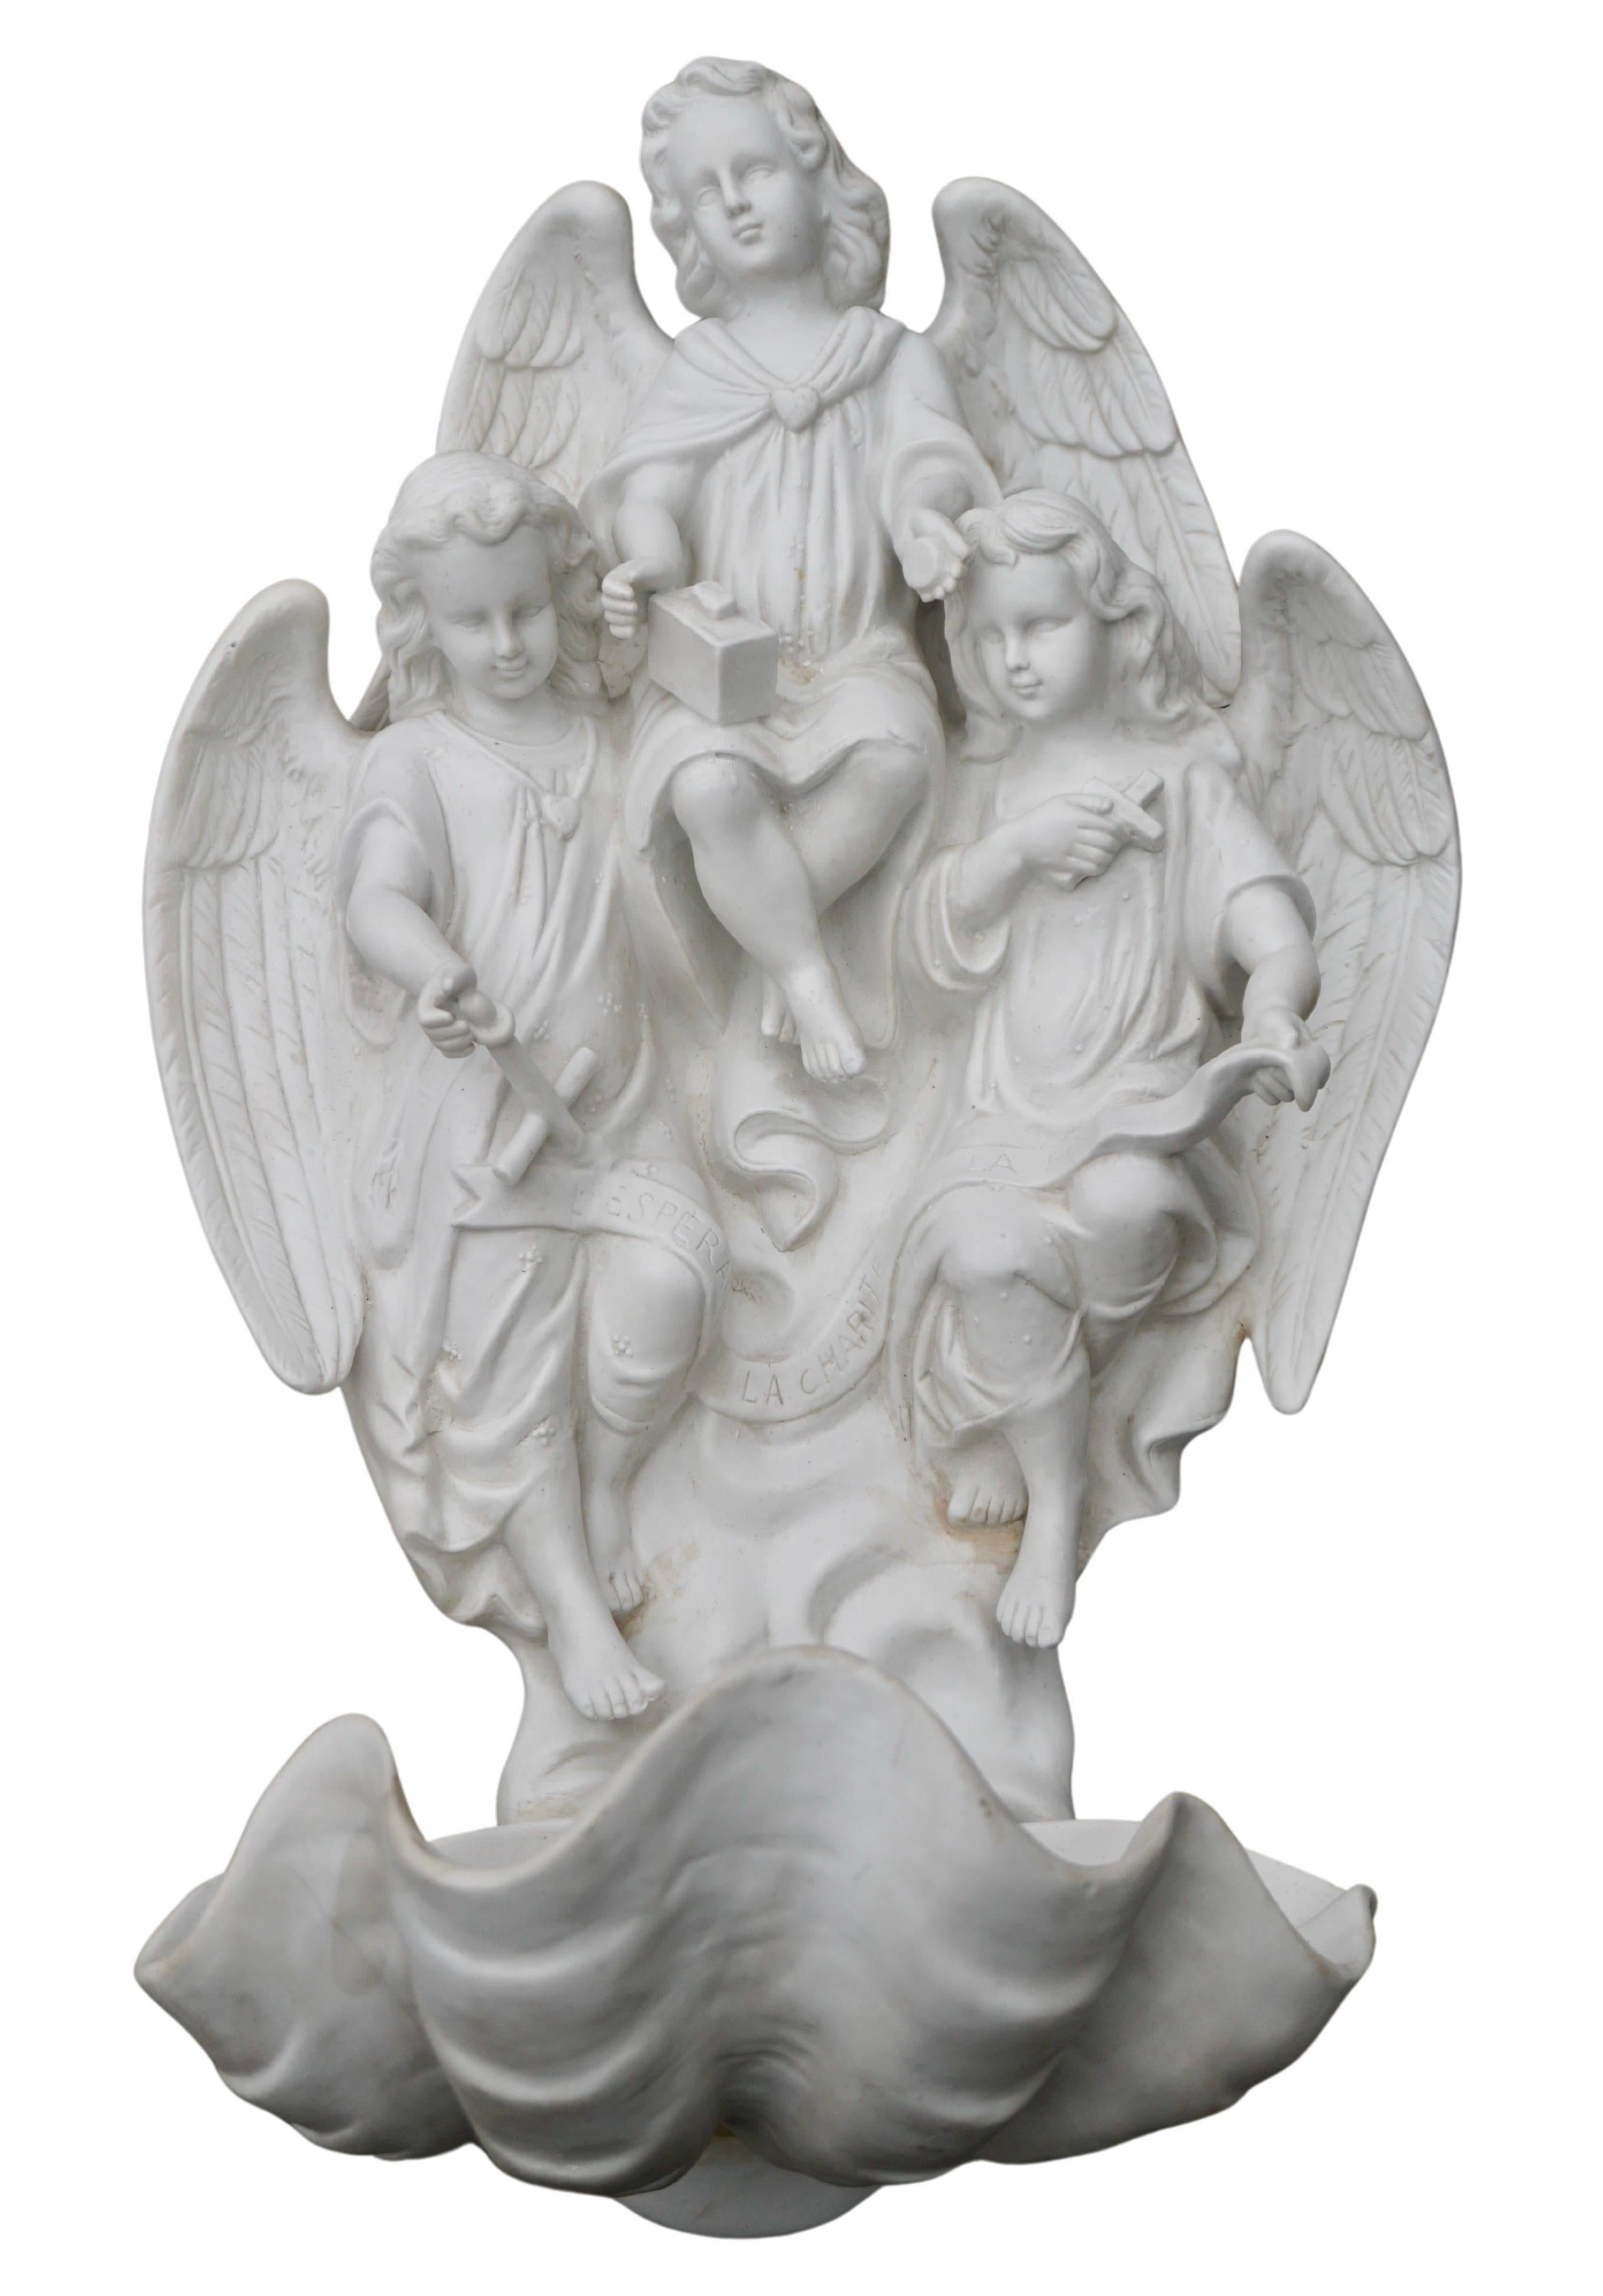 Rare antique large bisque porcelain holy water font with angels.

A beautiful quality large antique holy water font for the wall, made of bisque porcelain. Depiction of three angels with a shell as a holy water font. Signed on the back L M. Made in